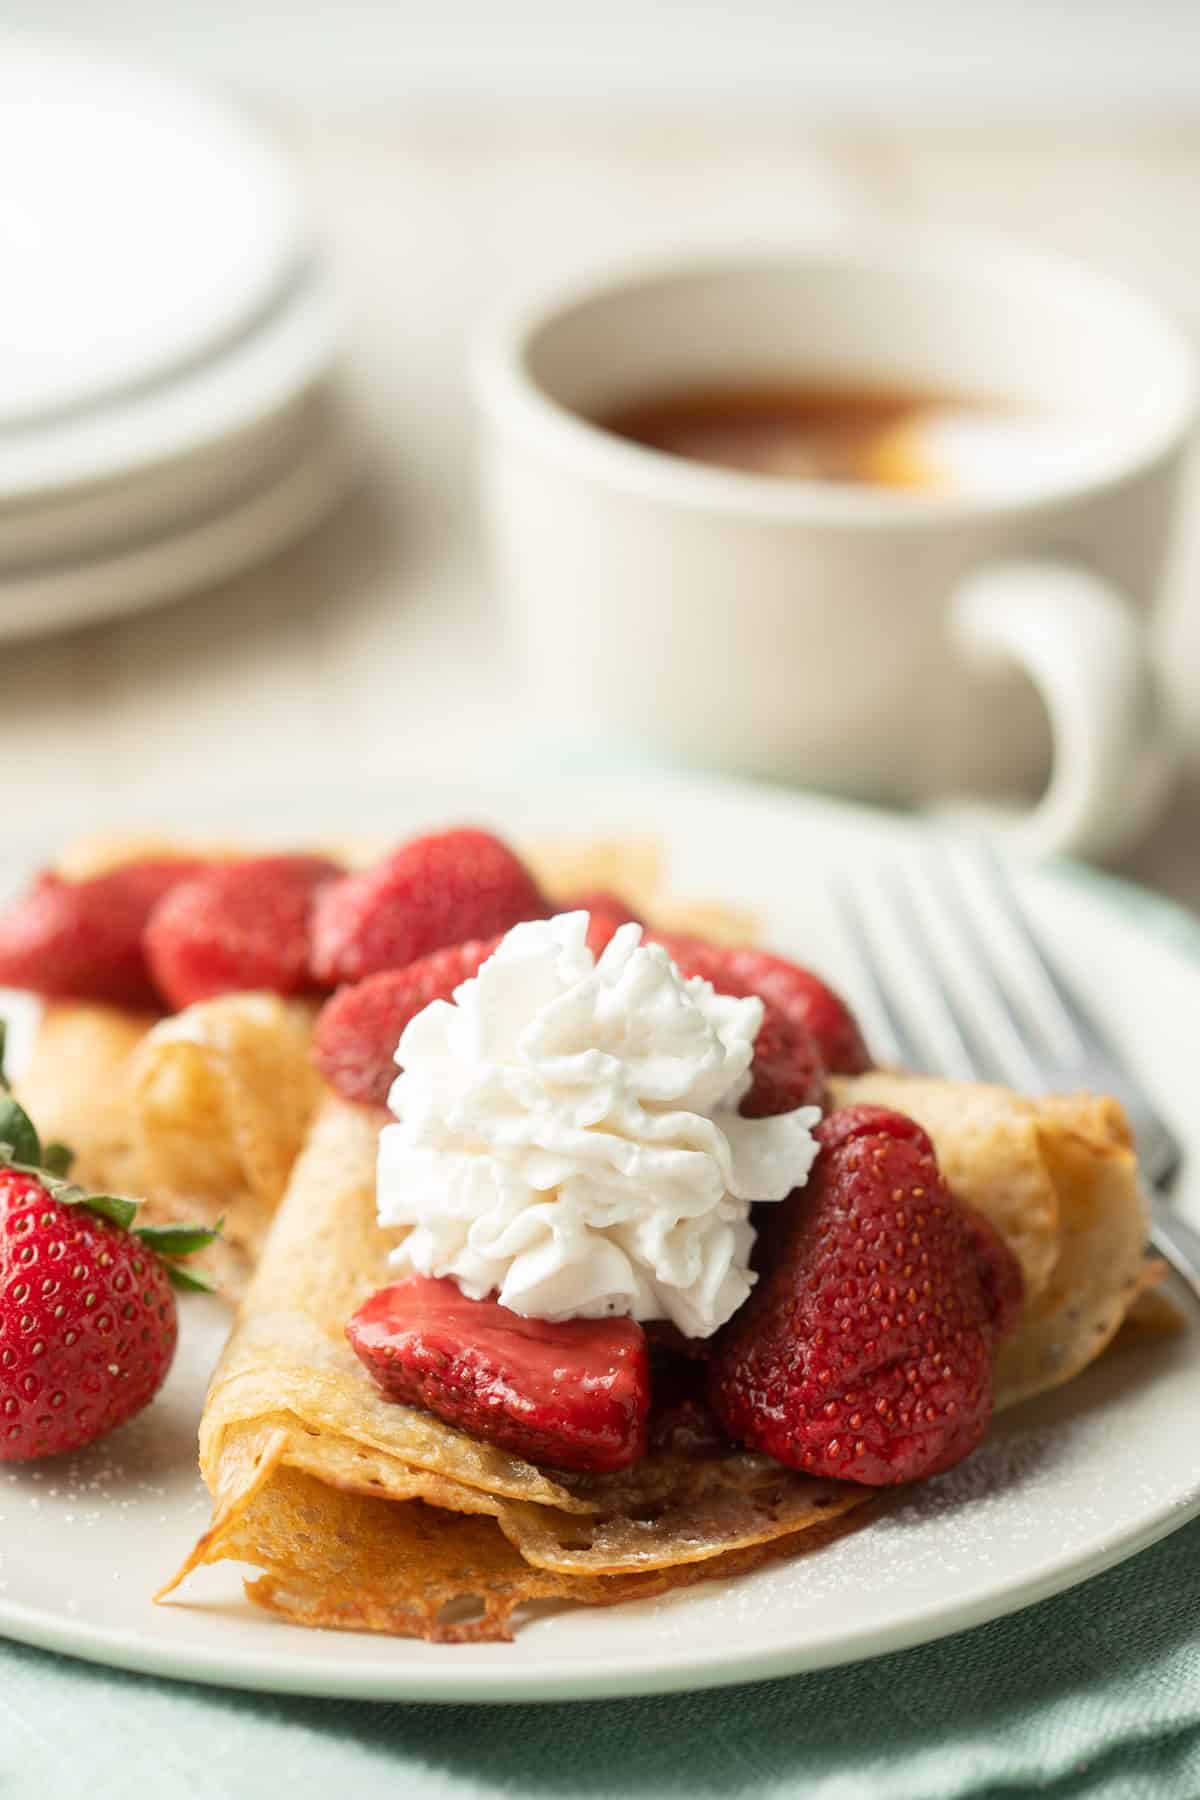 Plate of Vegan Crepes with strawberries and whipped cream on top, tea cup in the background.